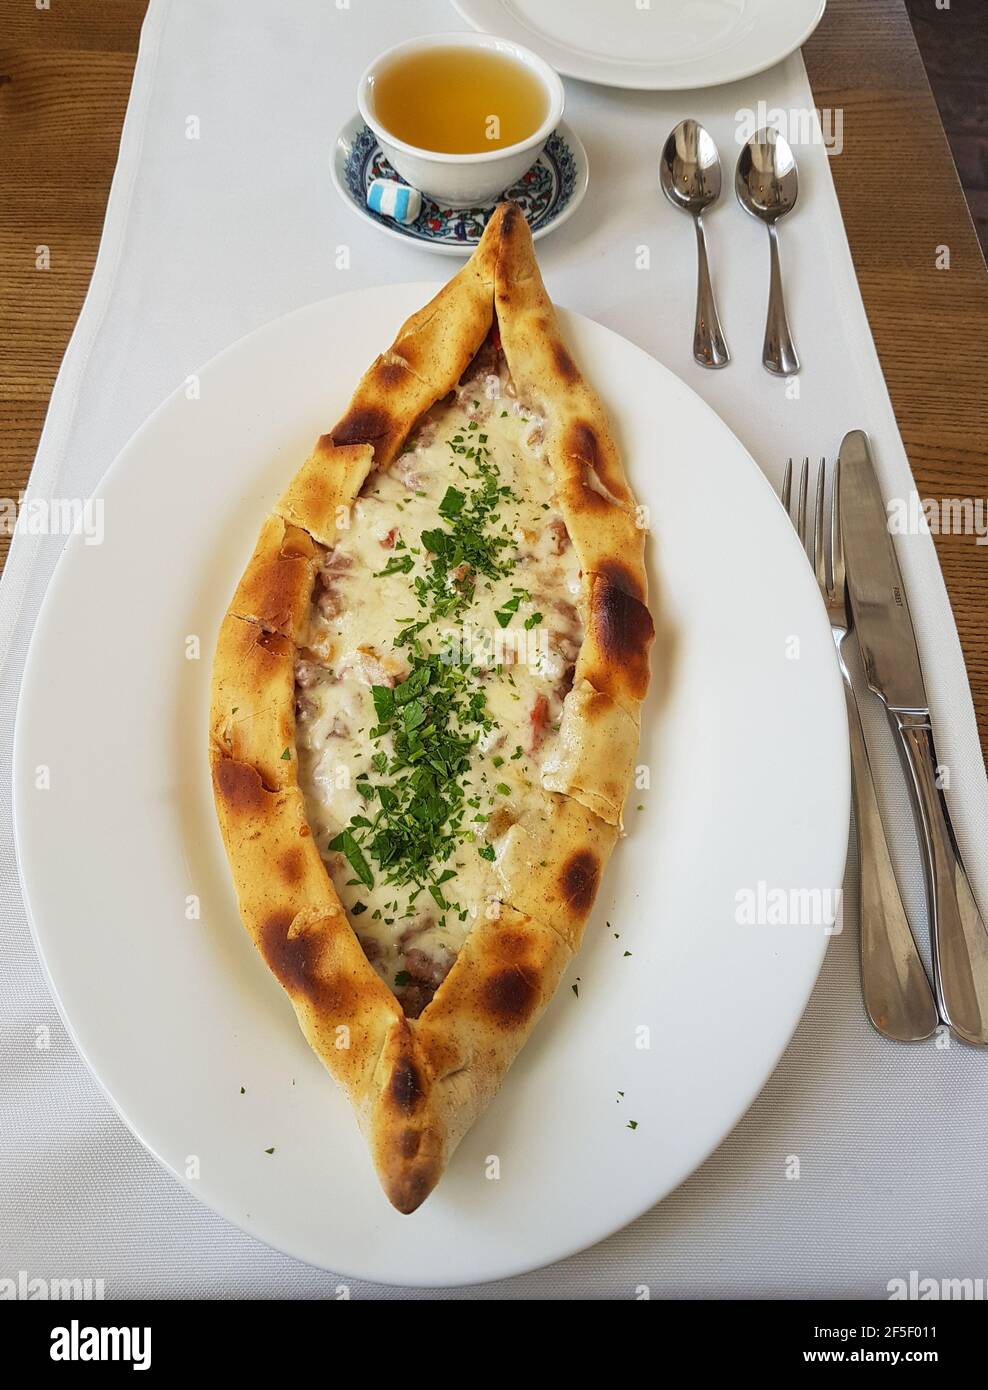 Traditional Turkish Cuisine Kasarli Pide boat-shaped flatbread with cheese, spices and herbs Food photography Stock Photo